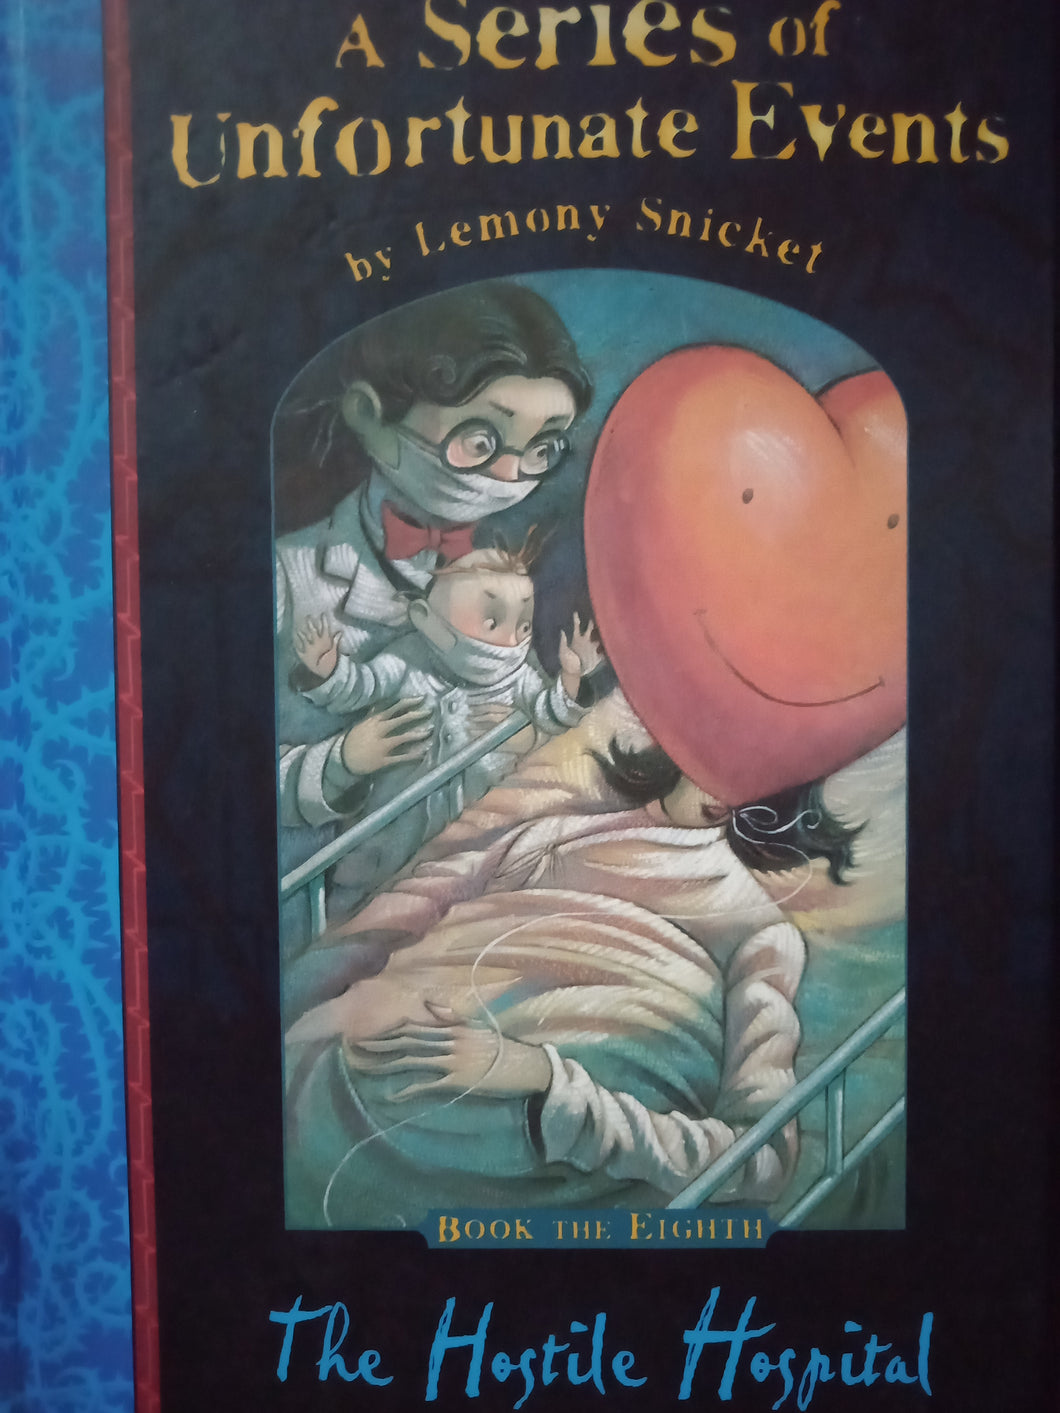 A Series Of Unfortunate Events: The Hostile Hospital by Lemony Snicket